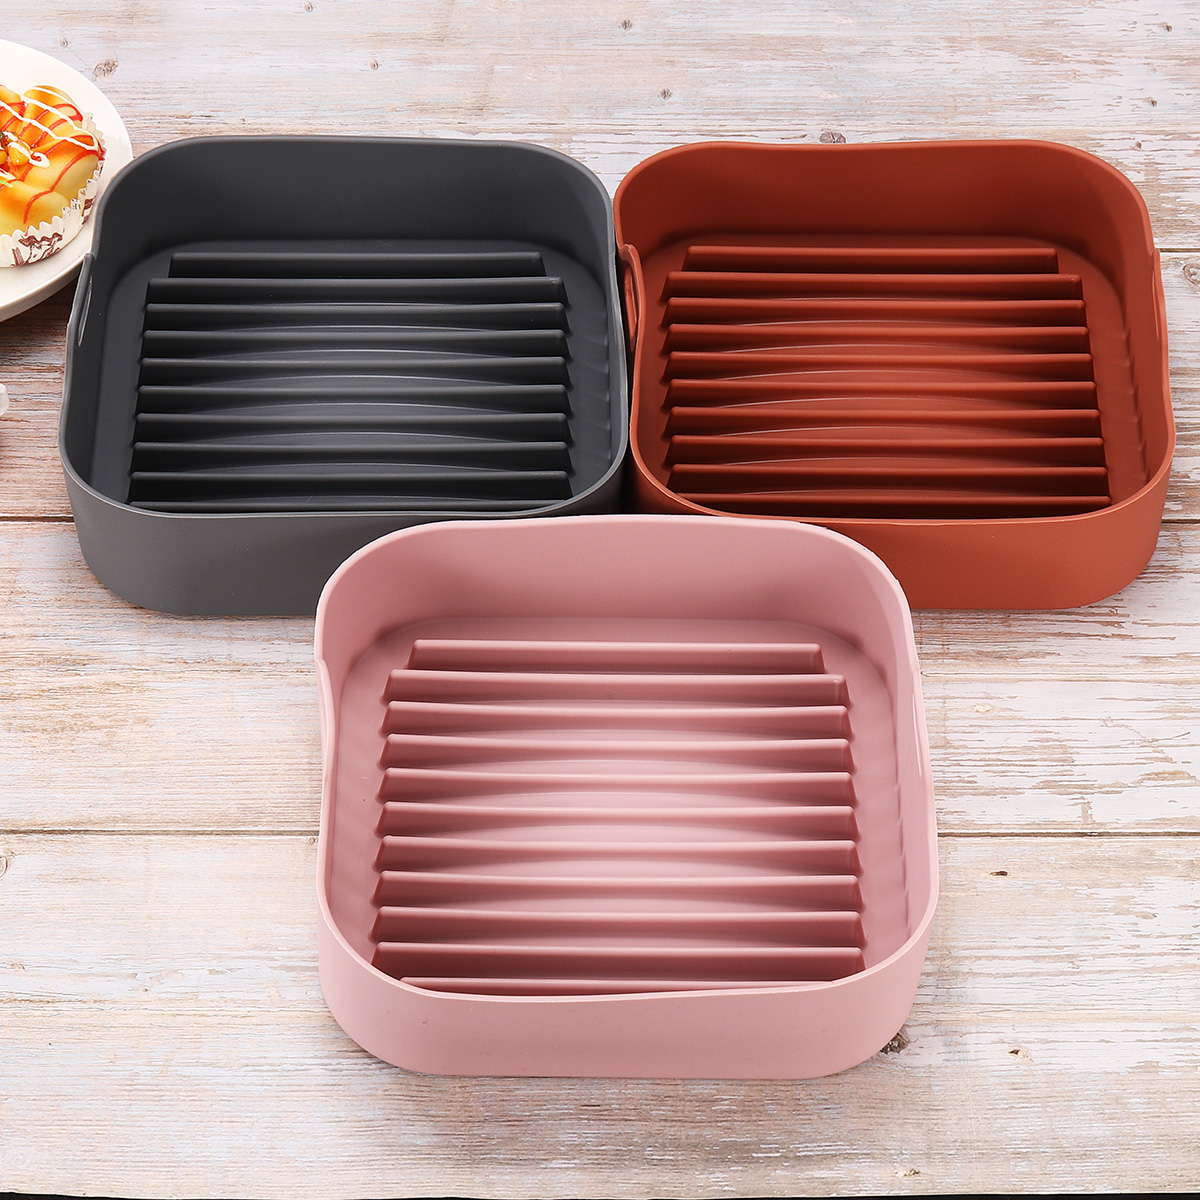 Multifunctional-Silicone-Baking-Tray-High-Temperature-Resistant-Non-stick-Bread-Fried-Baking-Pan-wit-1864776-8